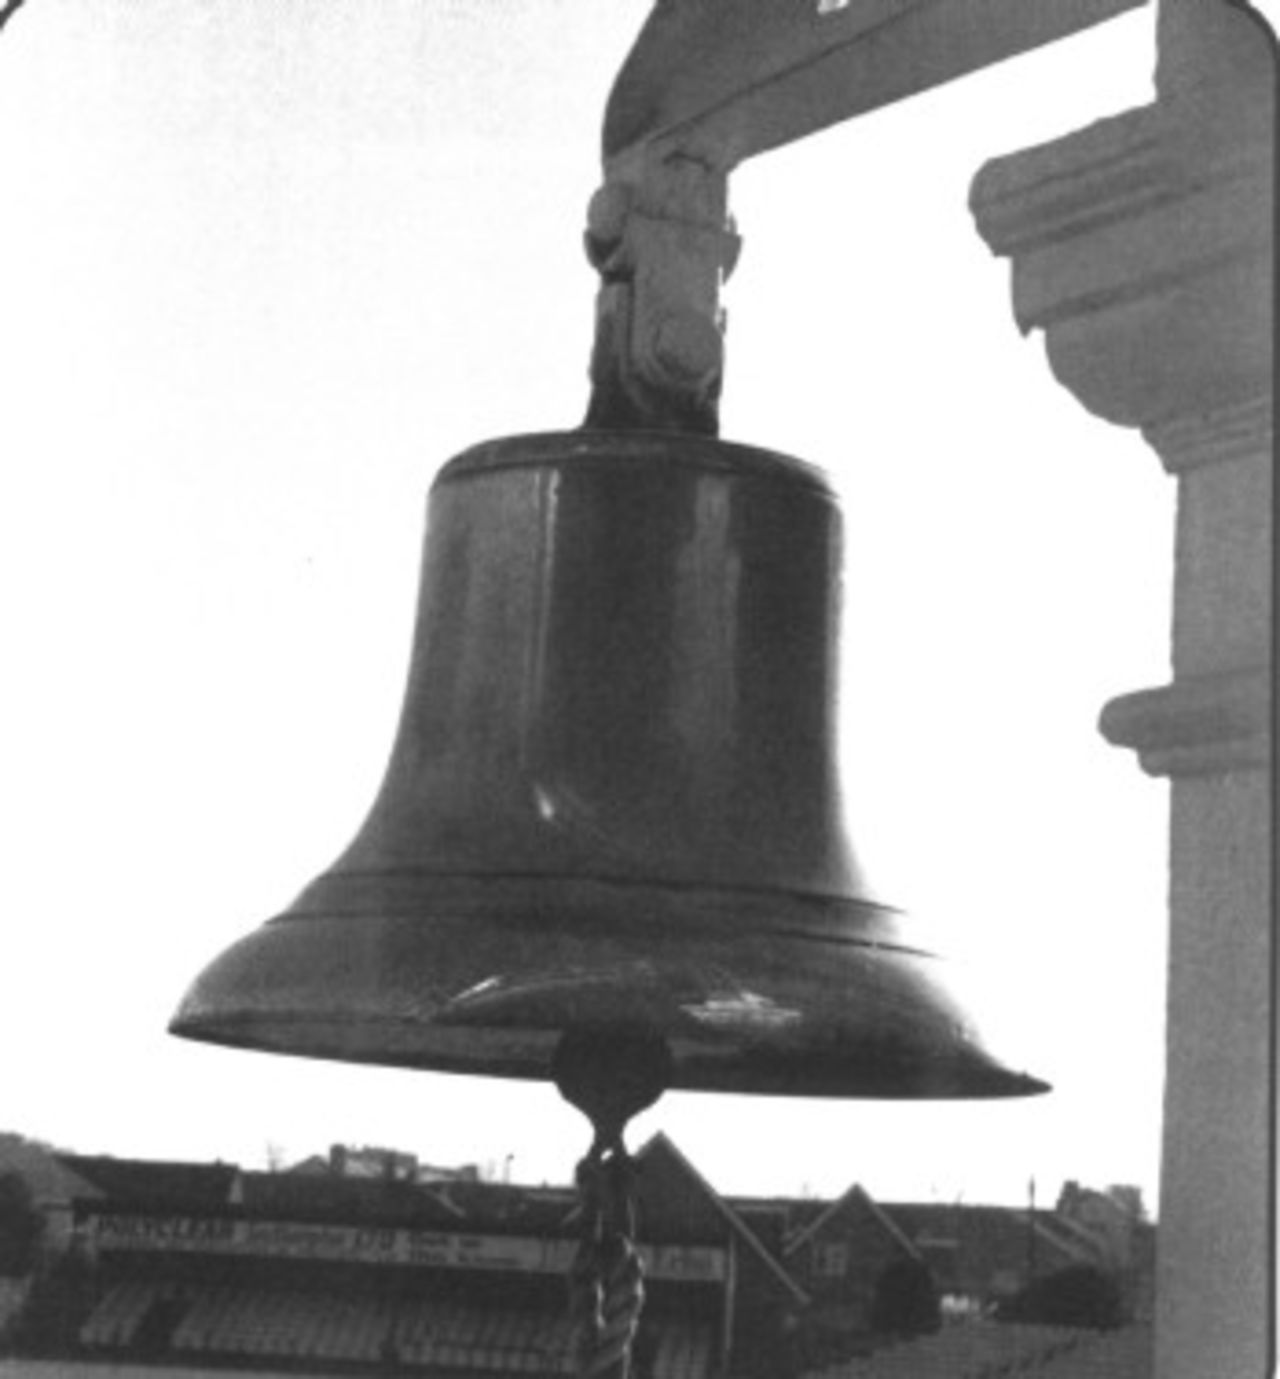 The SS Athlone Castle bell that calls the teams to play at the County Ground.